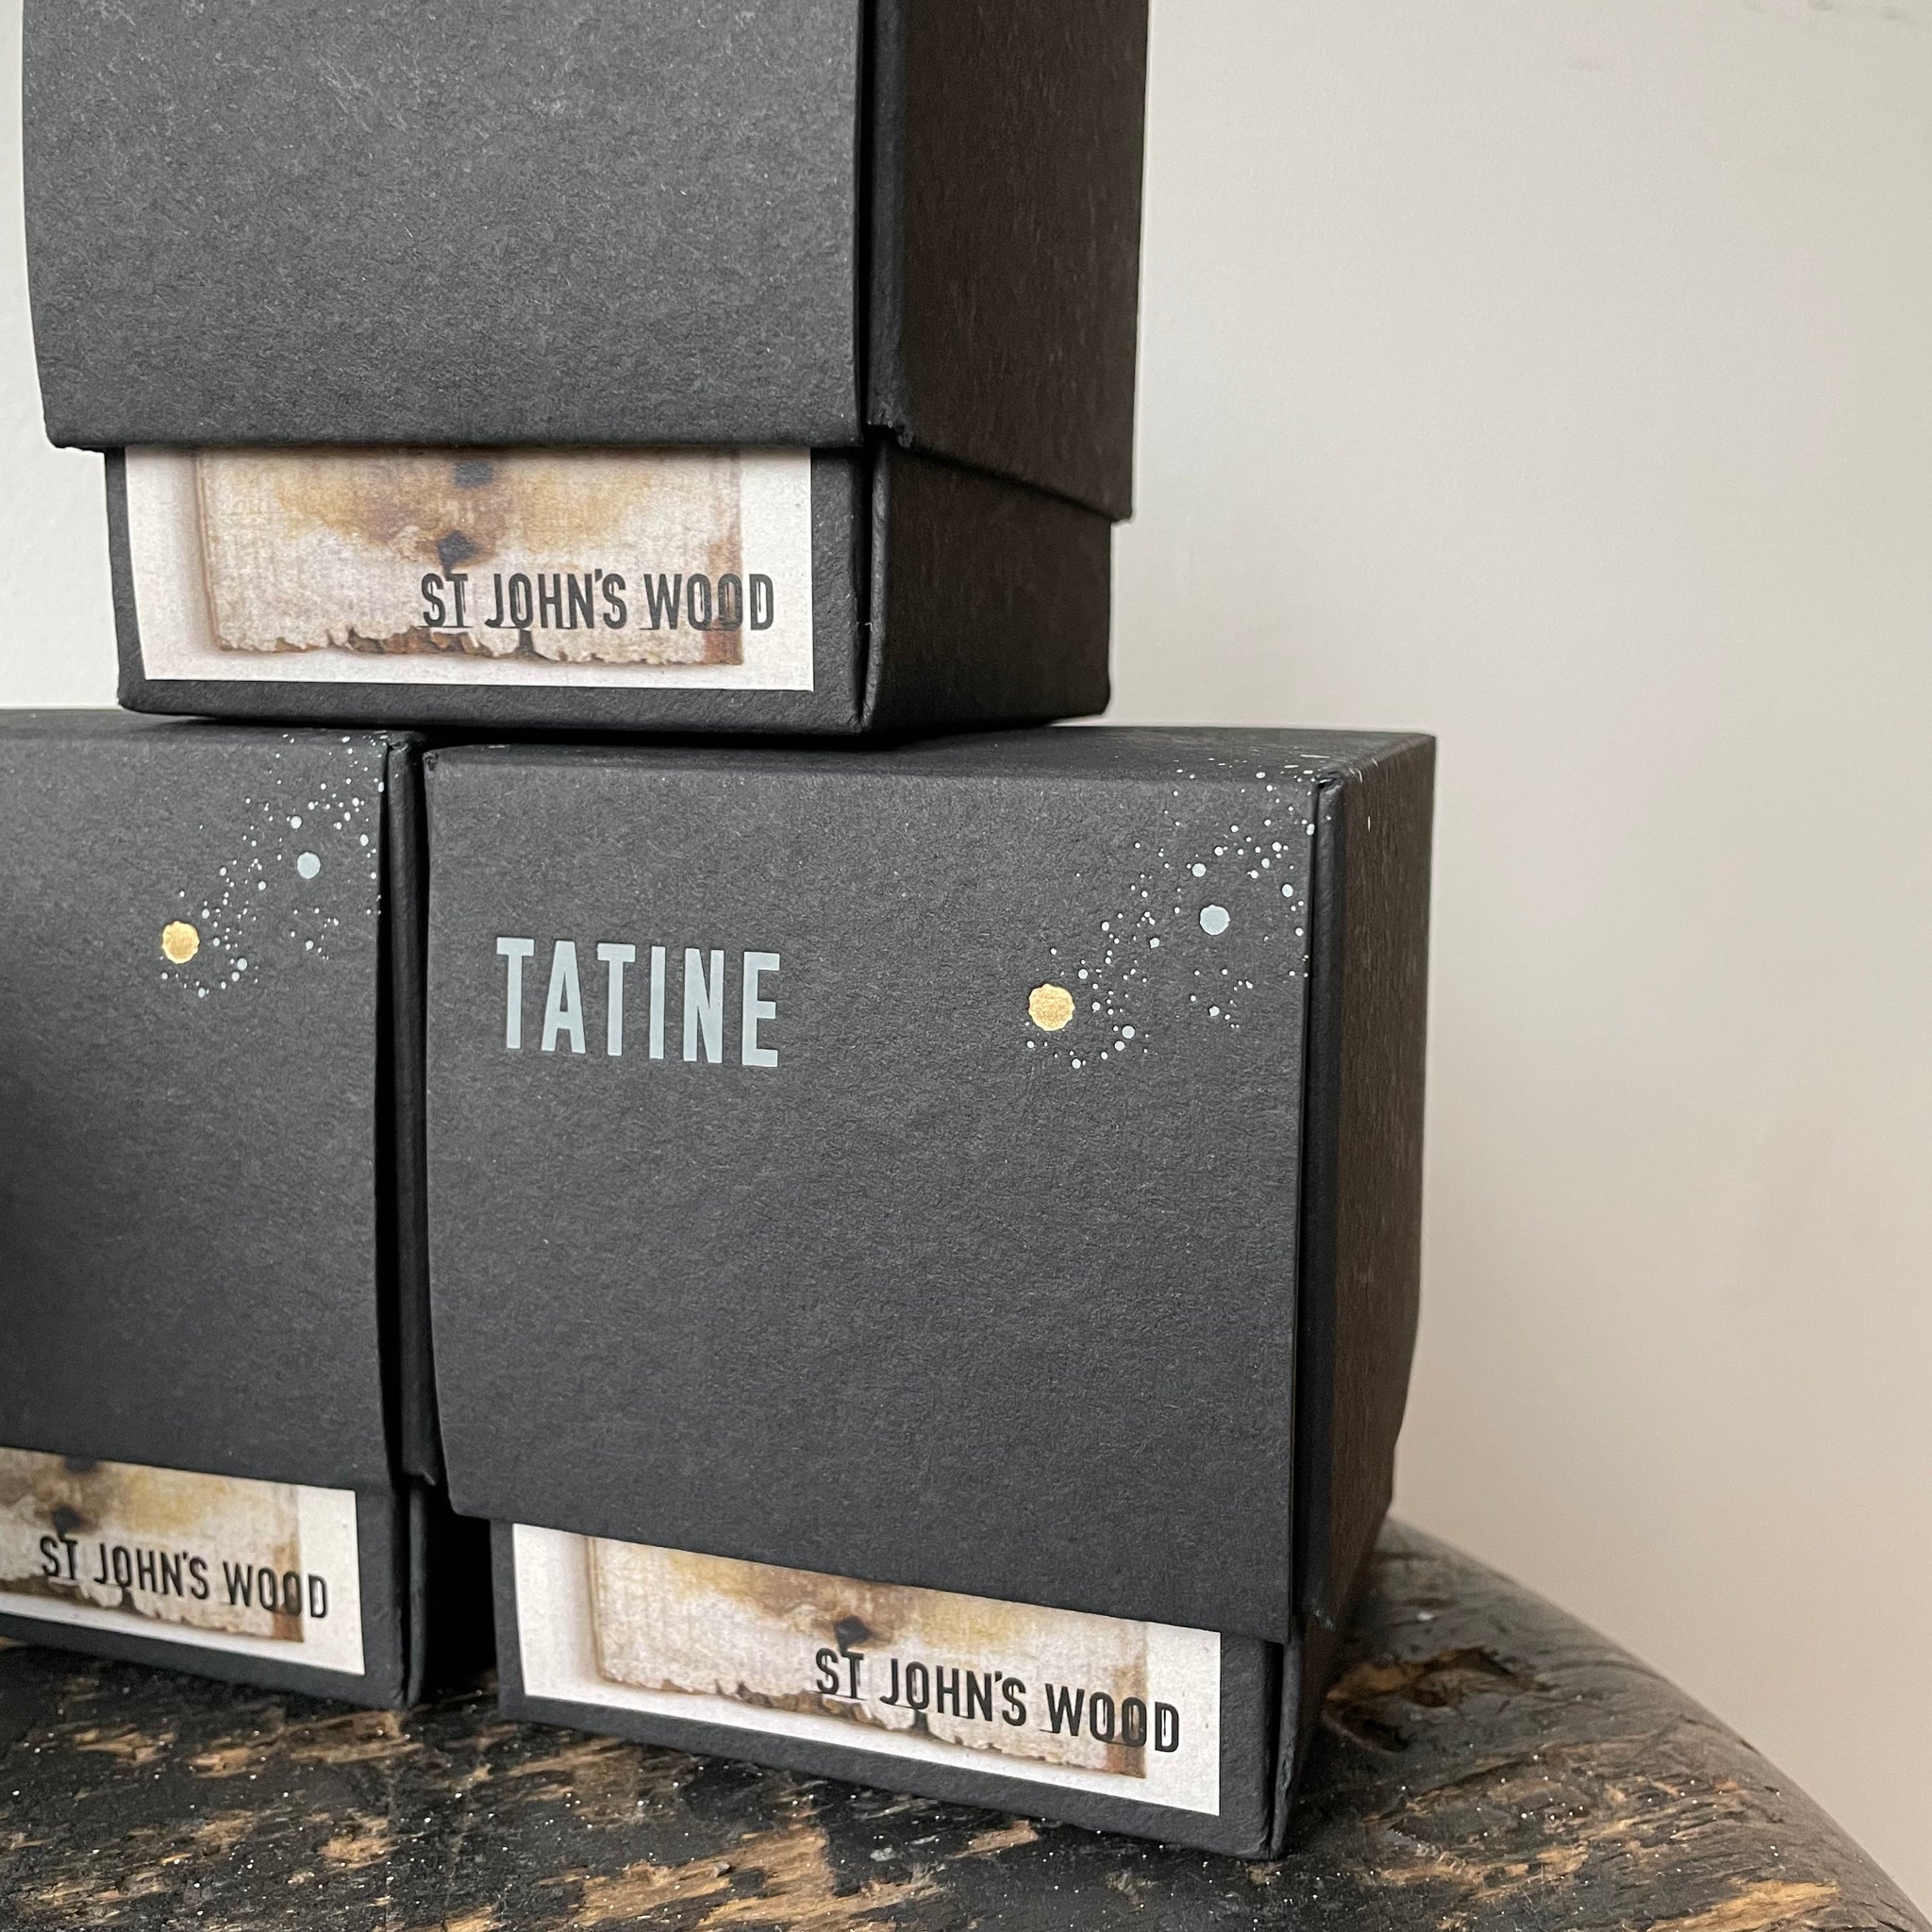 St. John's Wood Hand-Crafted Candle by Tatine